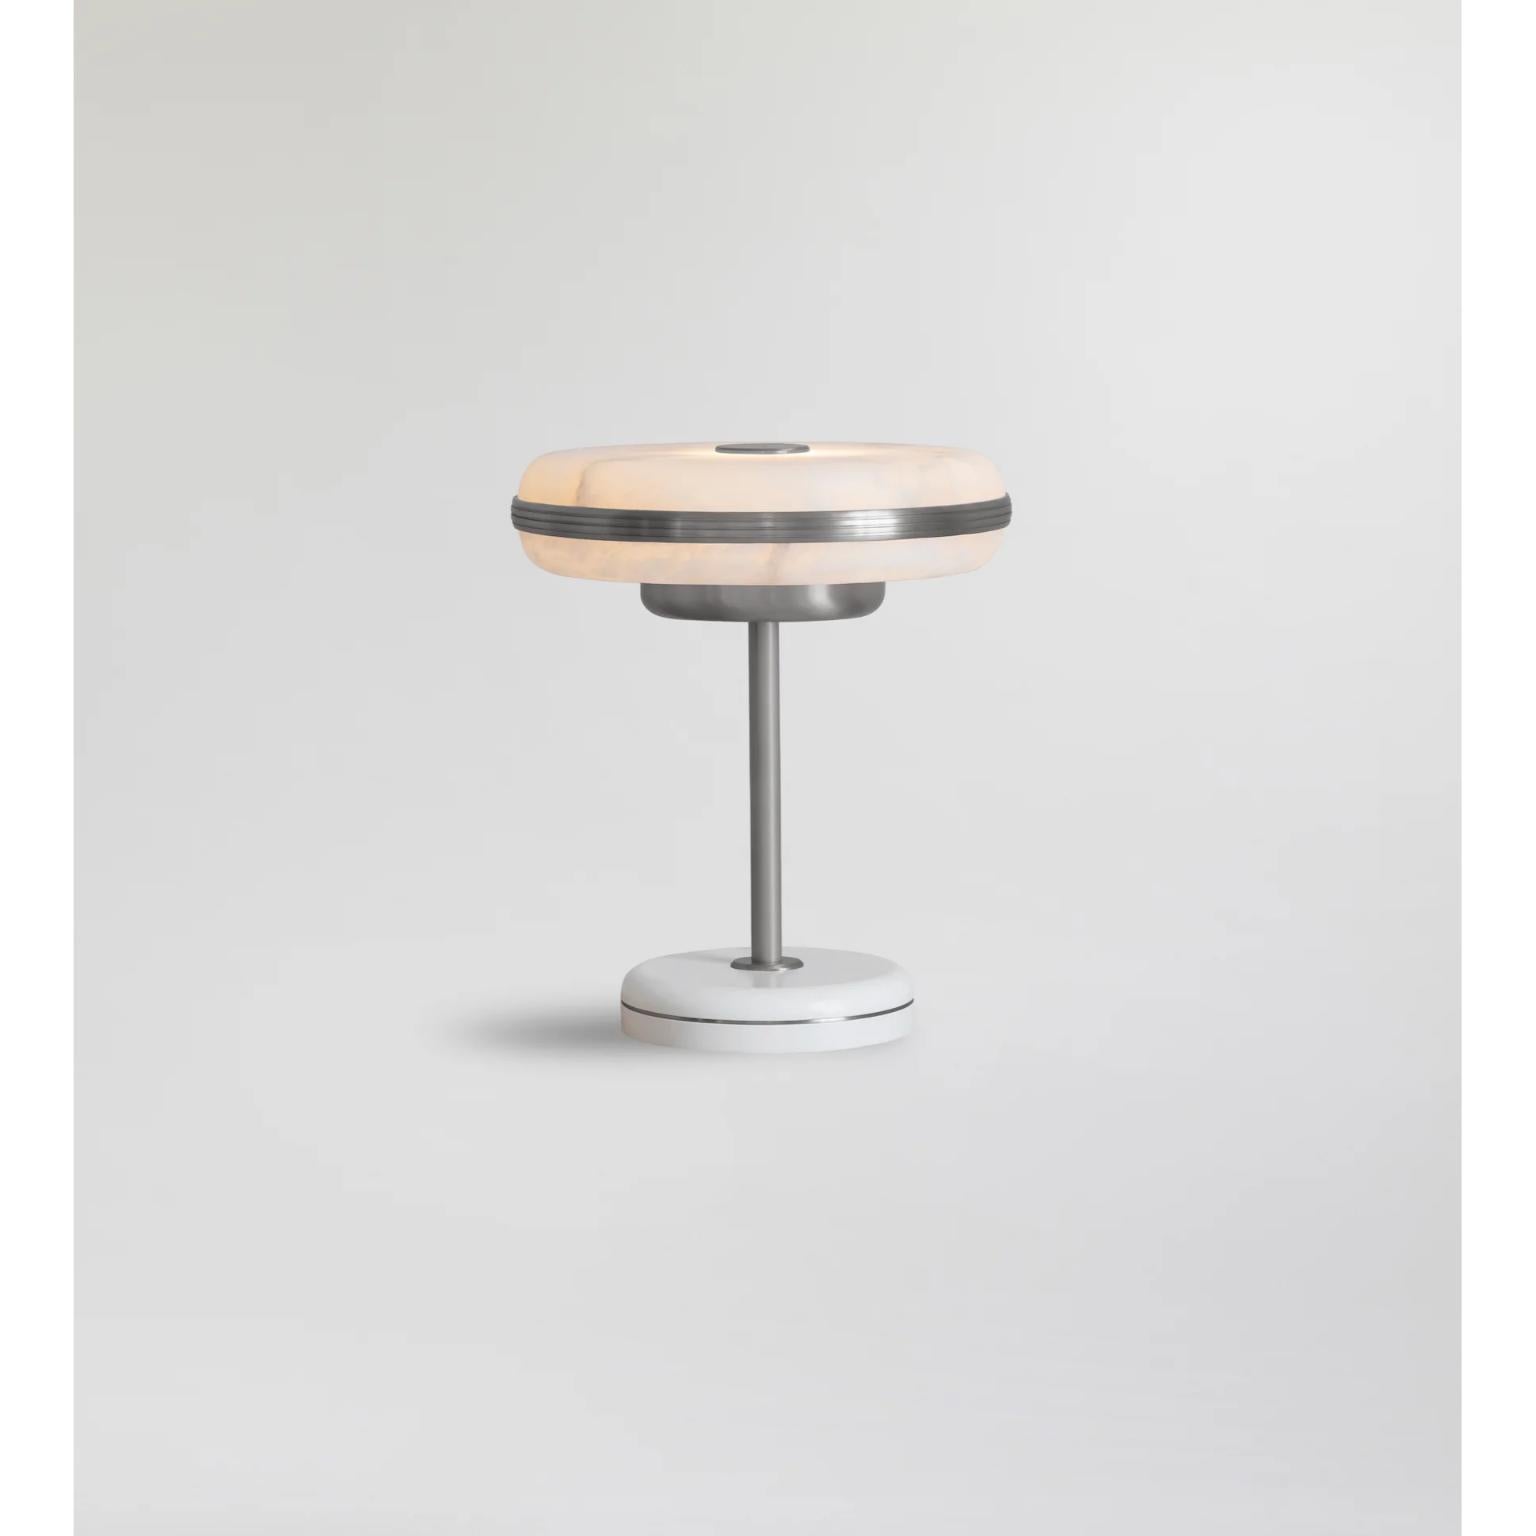 Beran Satin Nickel Small Table Lamp by Bert Frank
Dimensions: Ø 26 x H 28 cm.
Materials: Satin nickel and alabaster.
Base finish: Satin White.

Available in two different sizes. Available in different finishes and materials. Please contact us. 

The